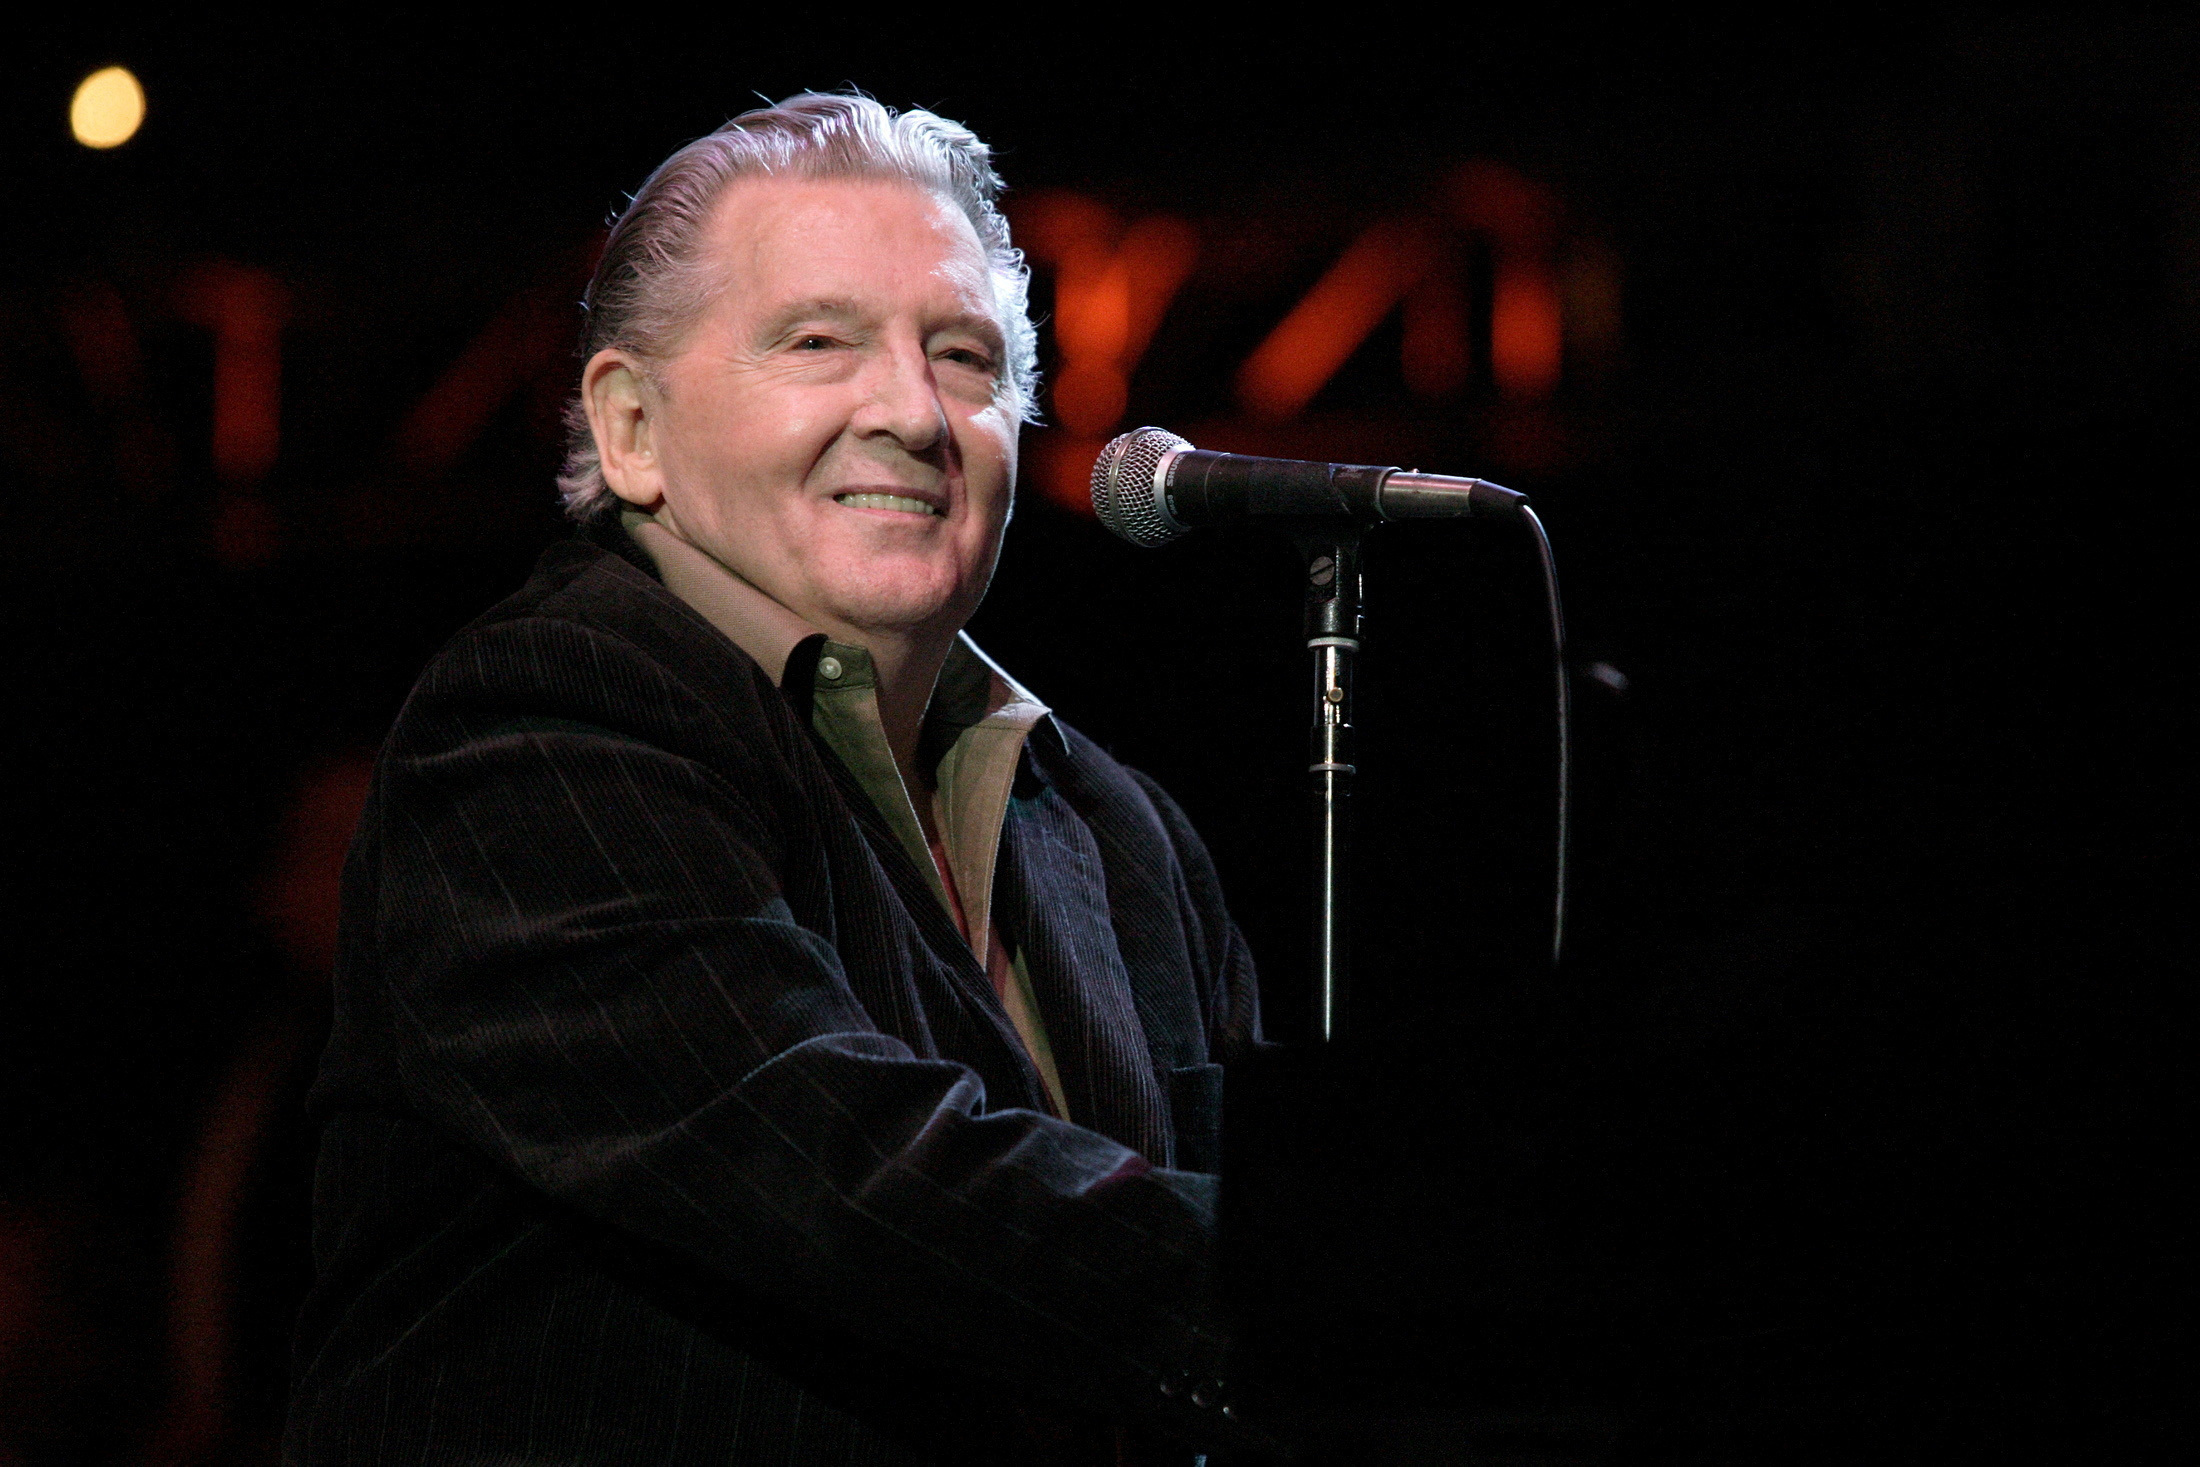 Jerry Lee Lewis performs at the Bridge School Benefit Concert in Mountain View